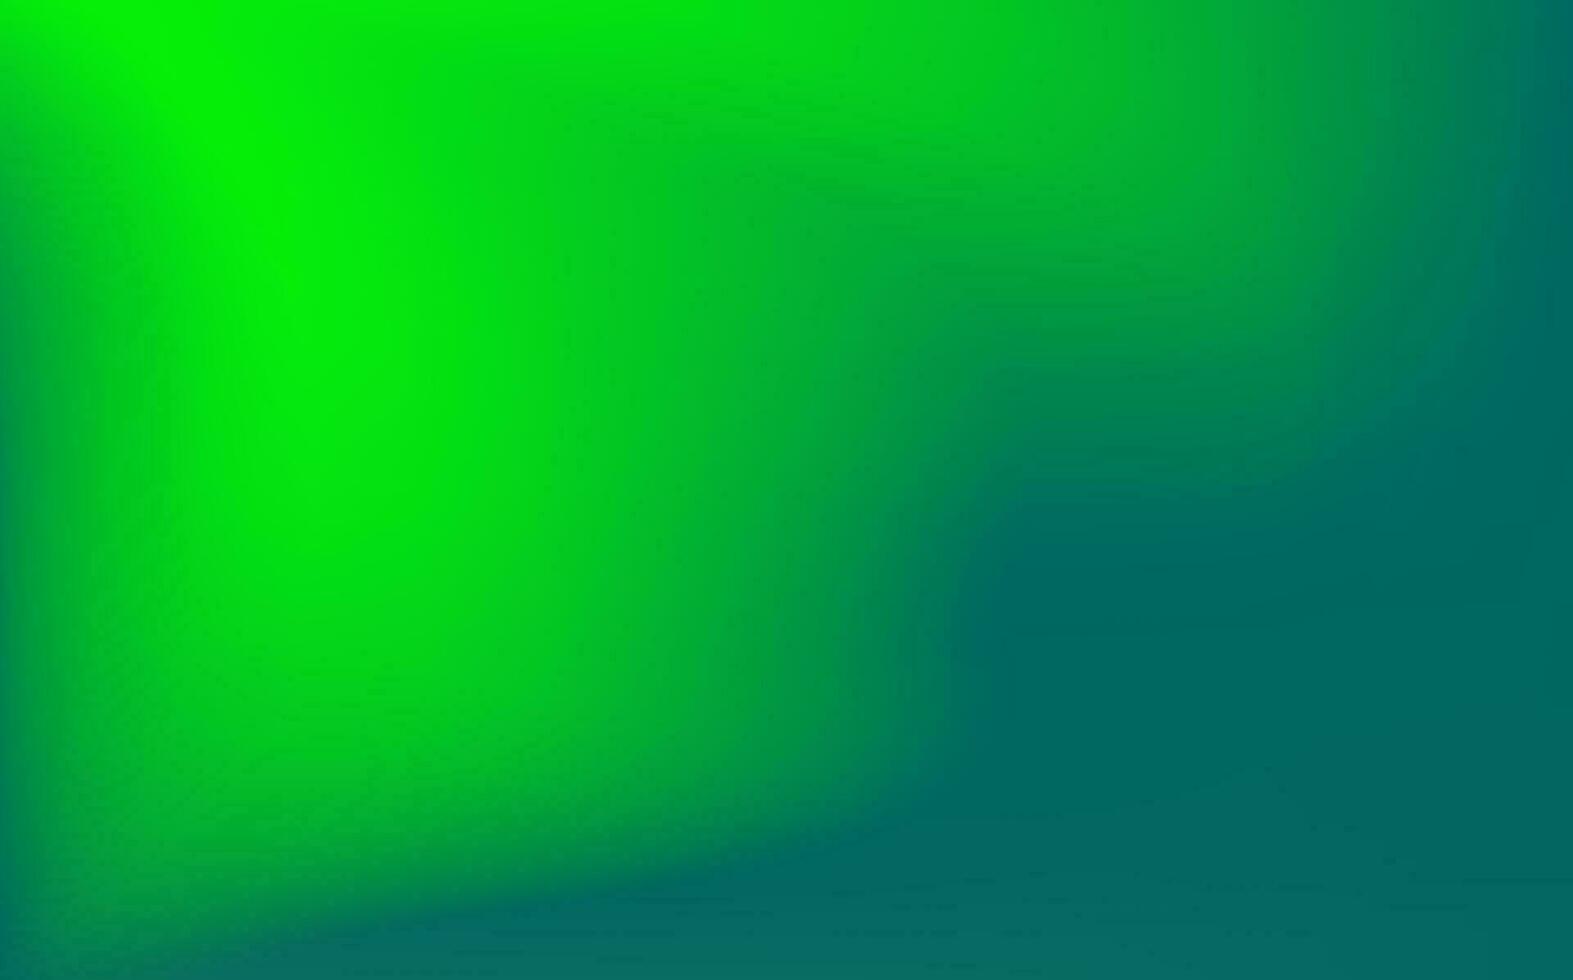 Neon blurred wave.Gradient design with green, mint blue colors.Vector abstract bright green gradient mesh. vector